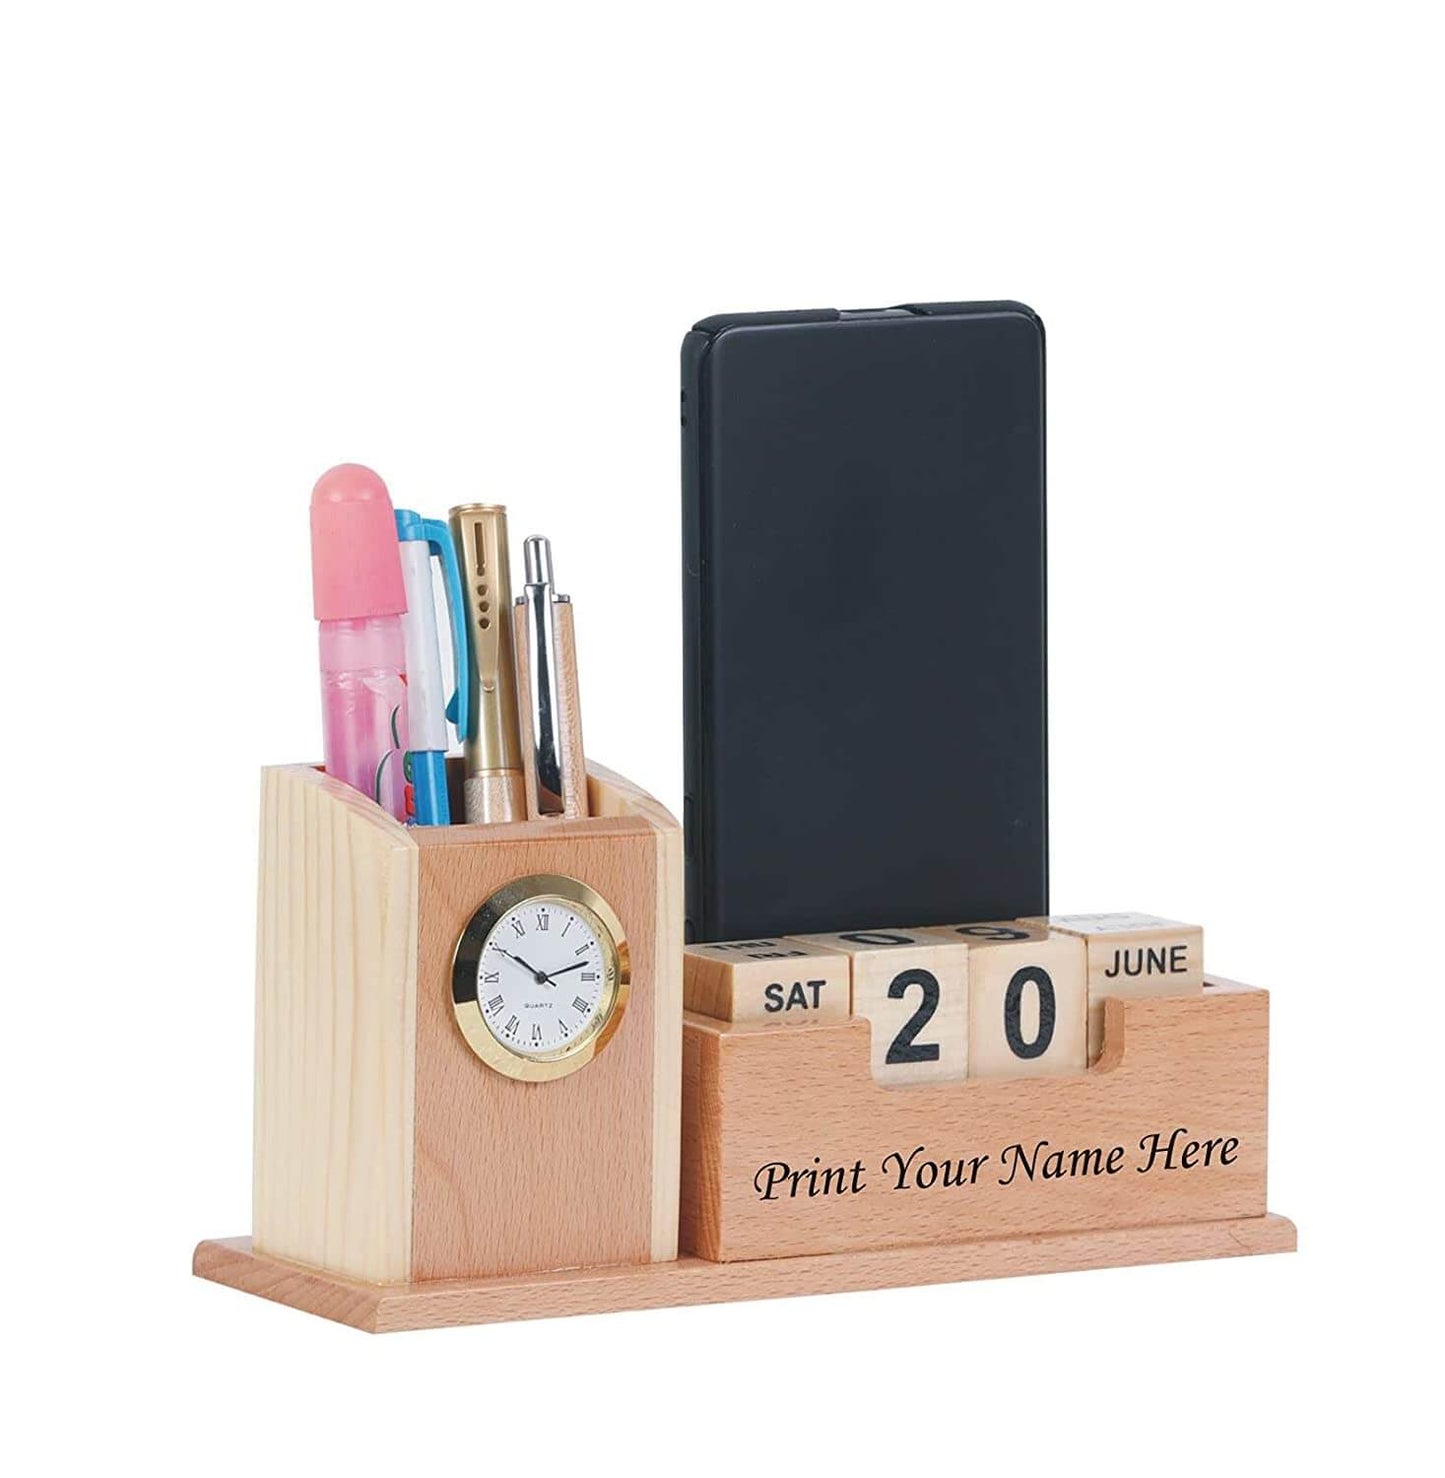 Personalised Gifts, Wooden Calendar With Your Name On It, Watch ,Mobile Phone Along With Multiple Pen Pencil Holder